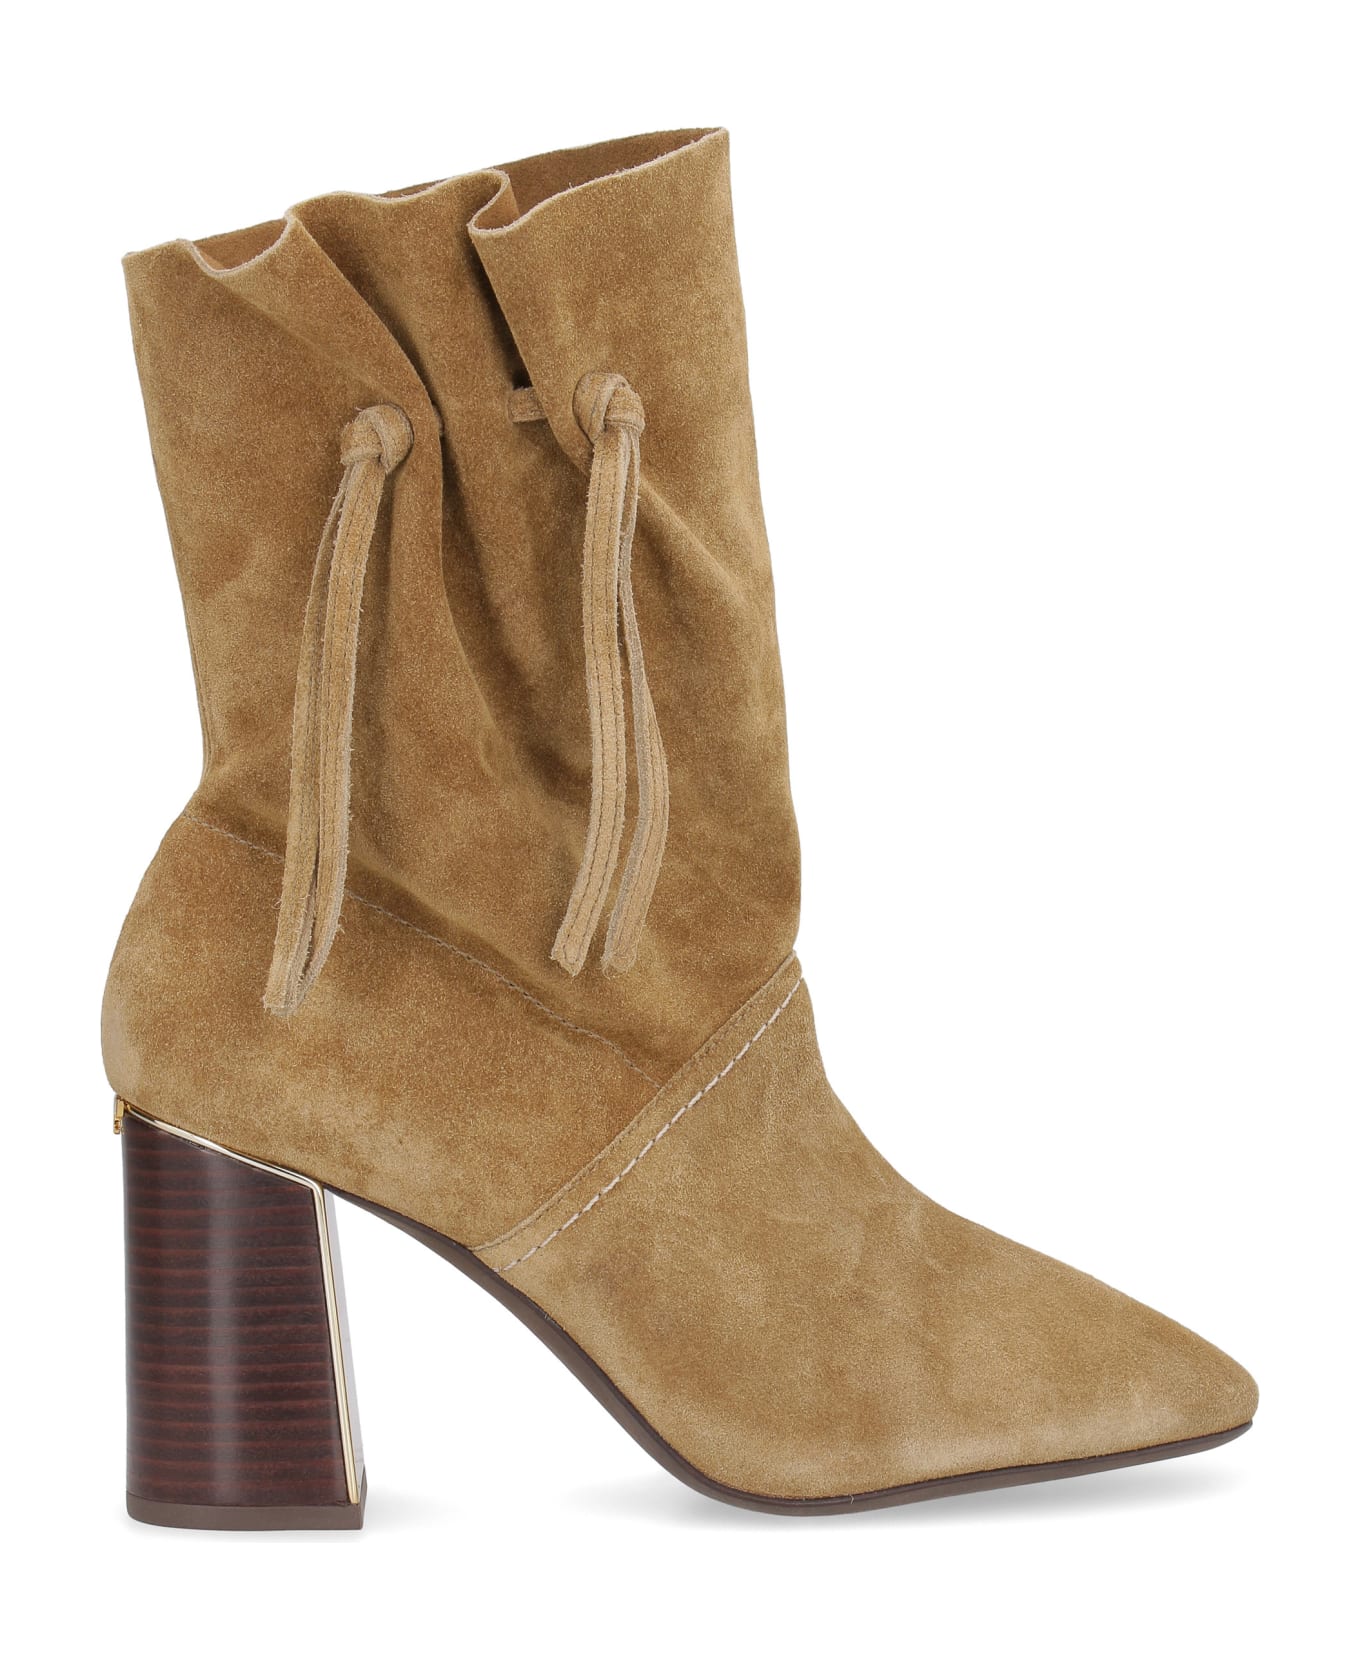 Tory Burch Gigi Suede Ankle Boots - Beige